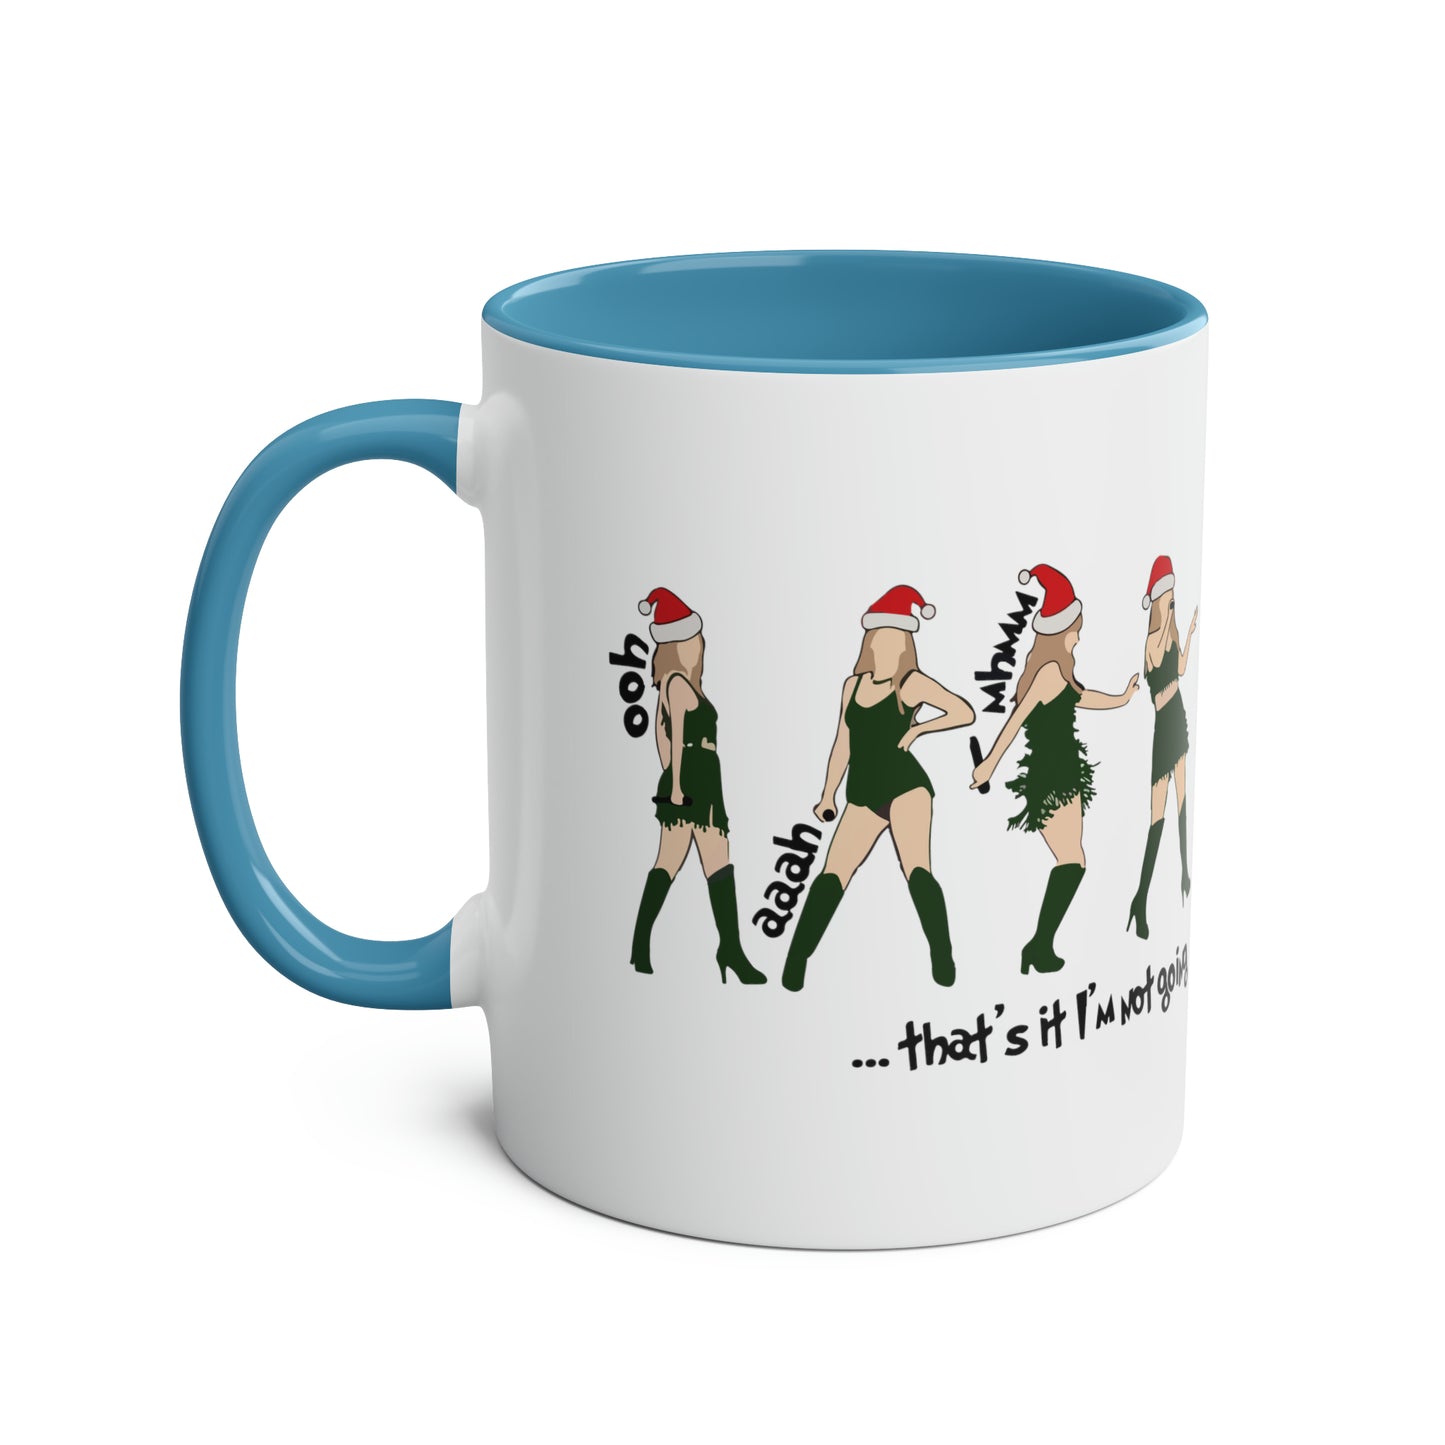 ... that's it, I'm not going / Taylor's Christmas Mug